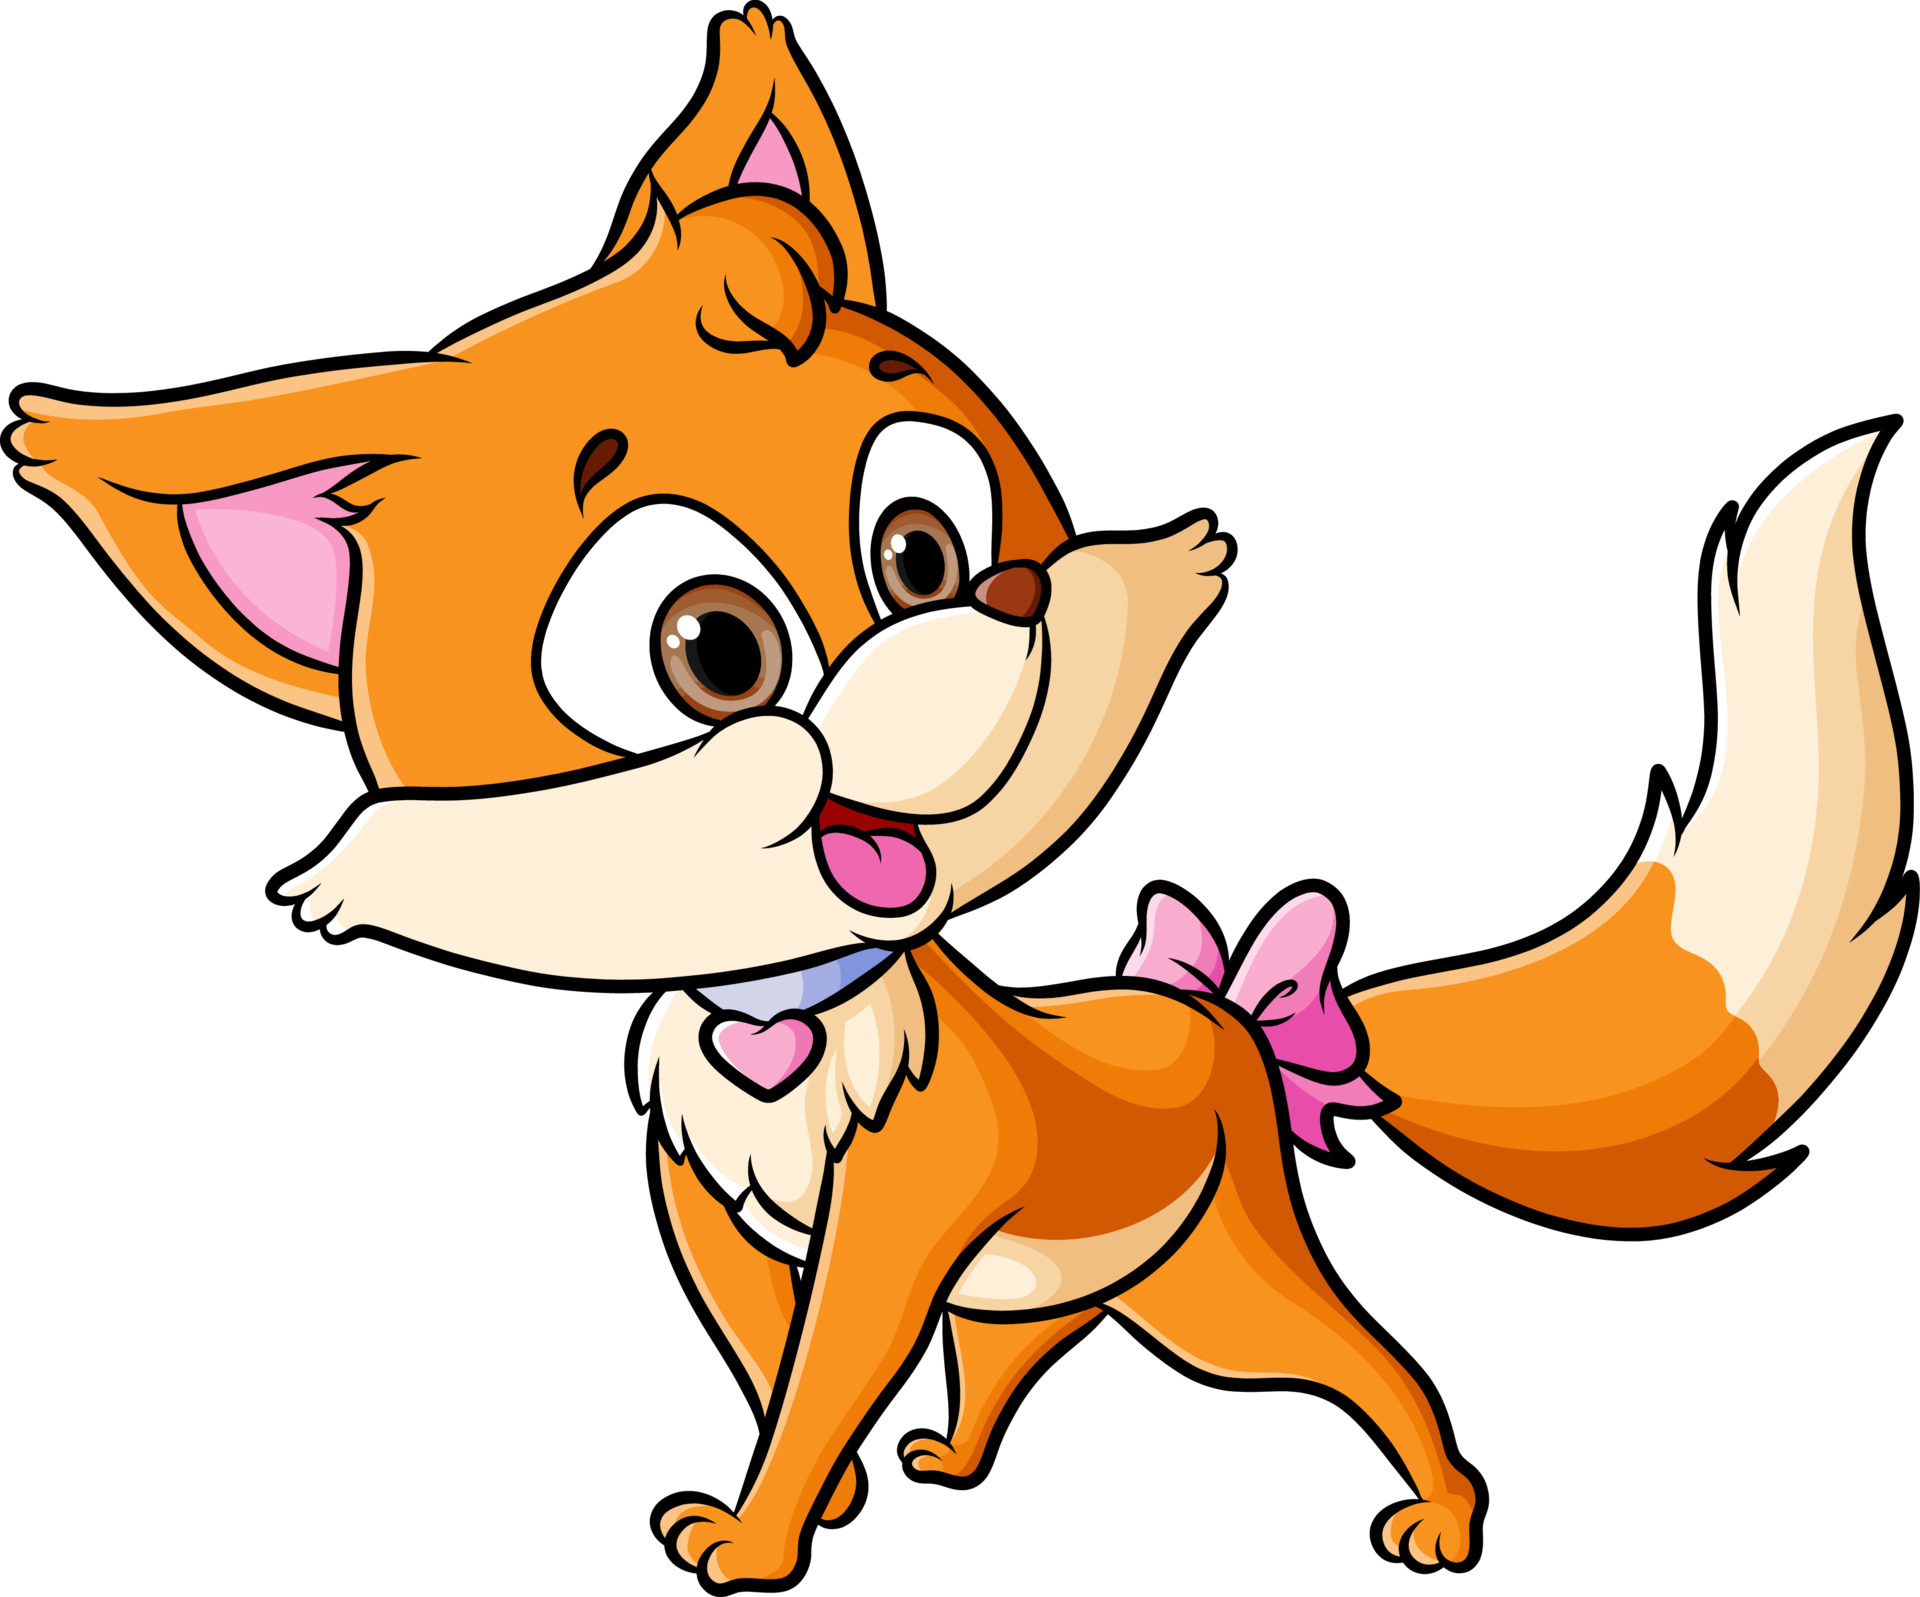 https://static.vecteezy.com/system/resources/previews/005/201/650/original/the-girly-fox-is-walking-with-the-cute-ribbon-tail-vector.jpg